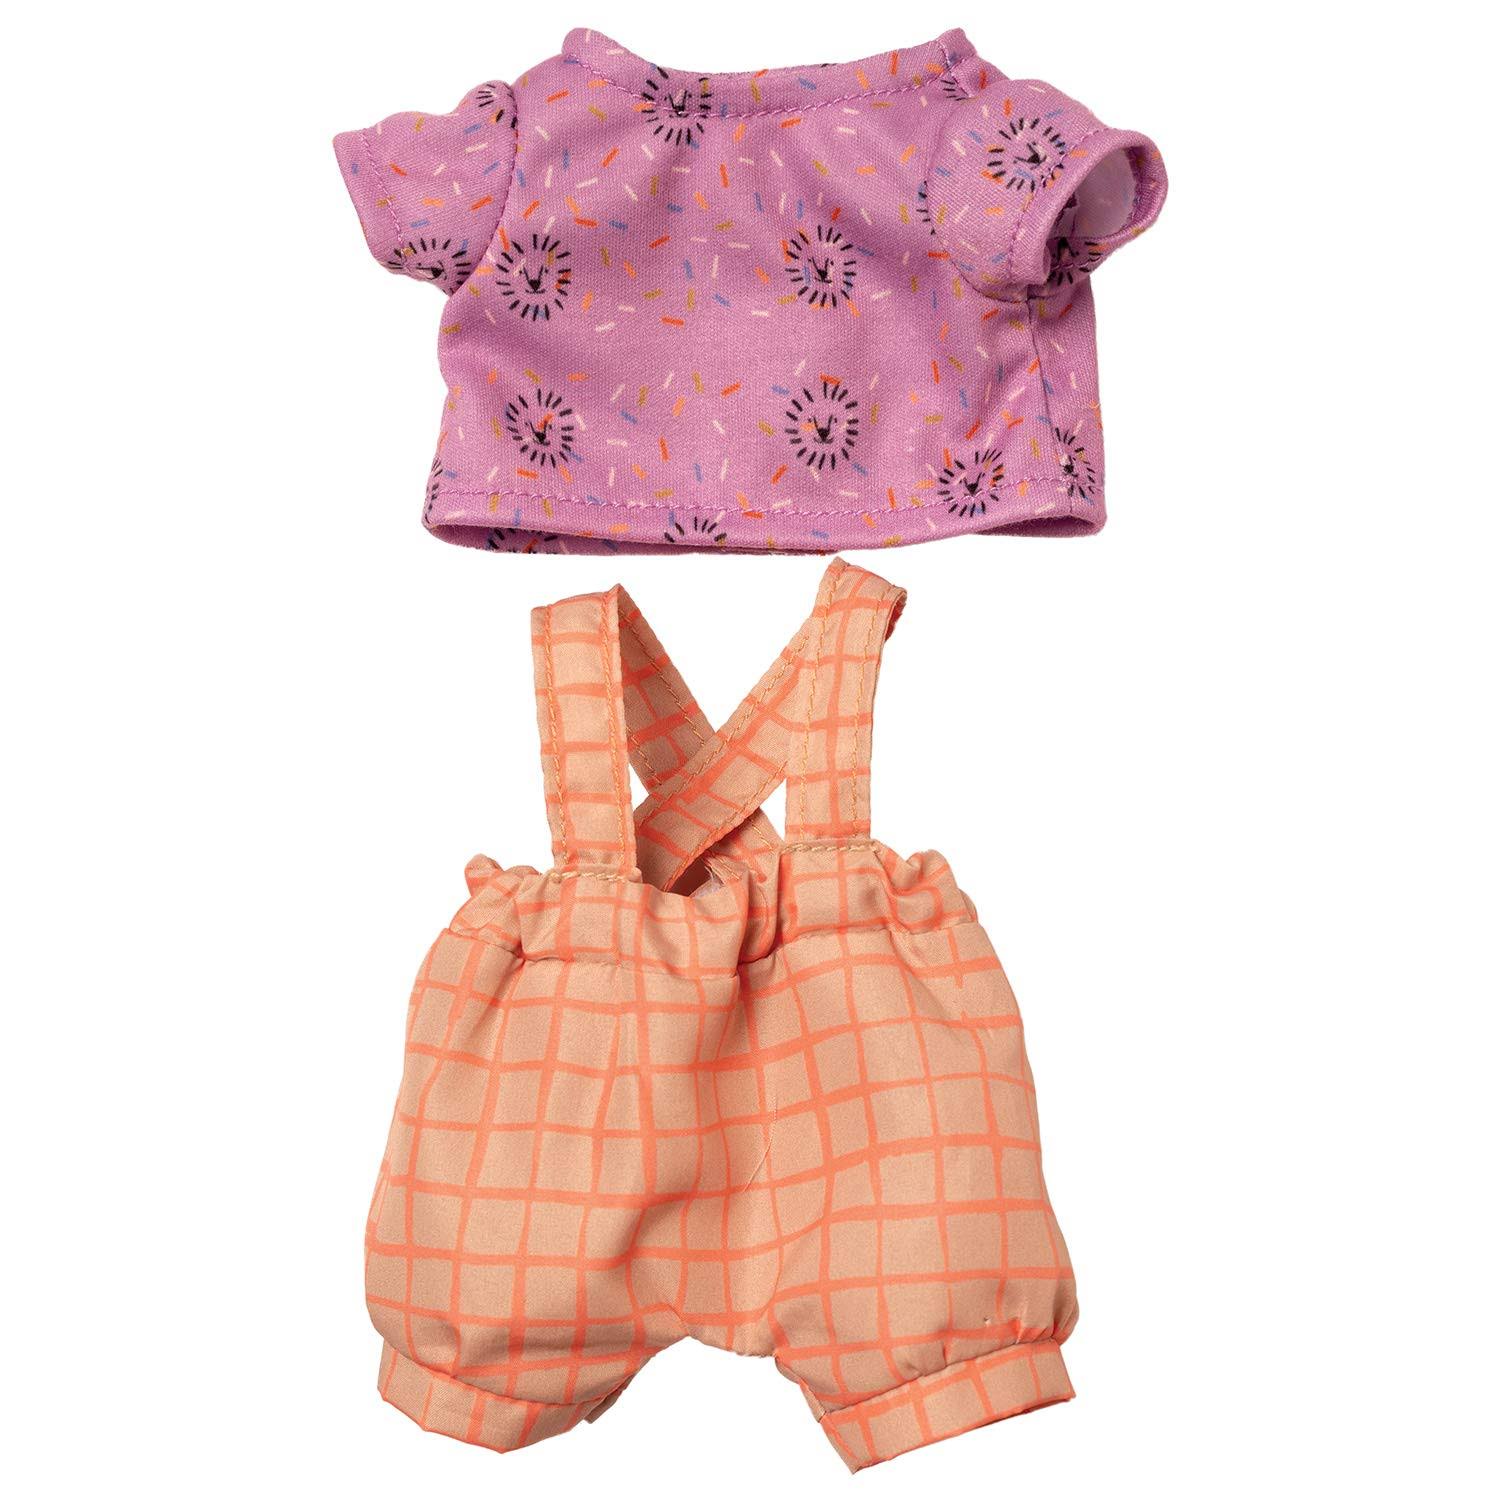 Manhattan Toy Wee Baby Stella Take Me to The Zoo 12" Baby Doll Outfit Set